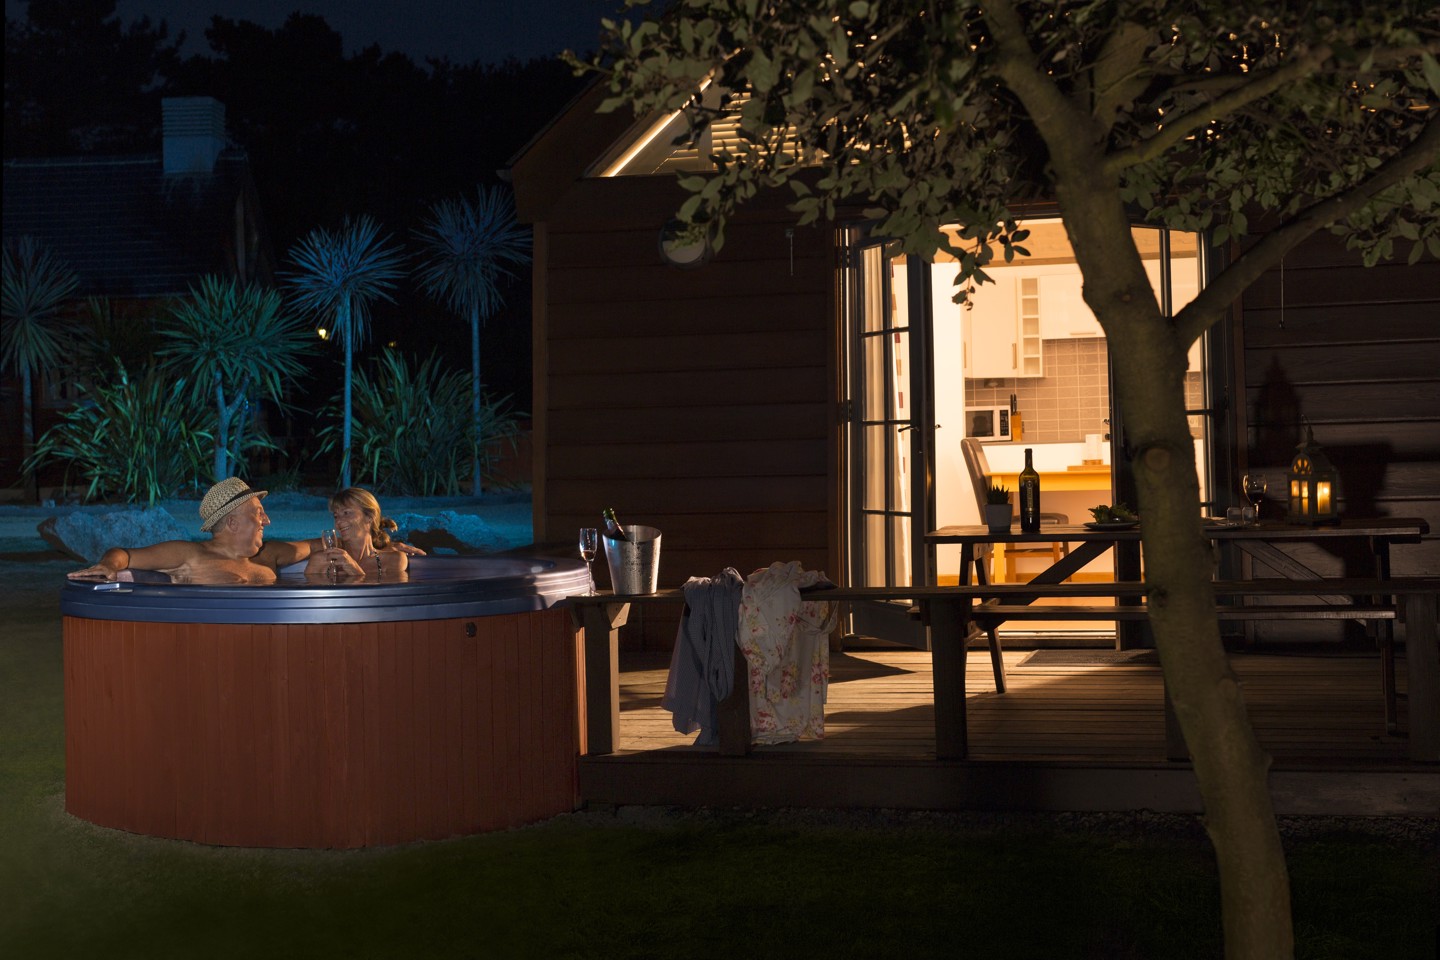 Couple in hot tub outside at night